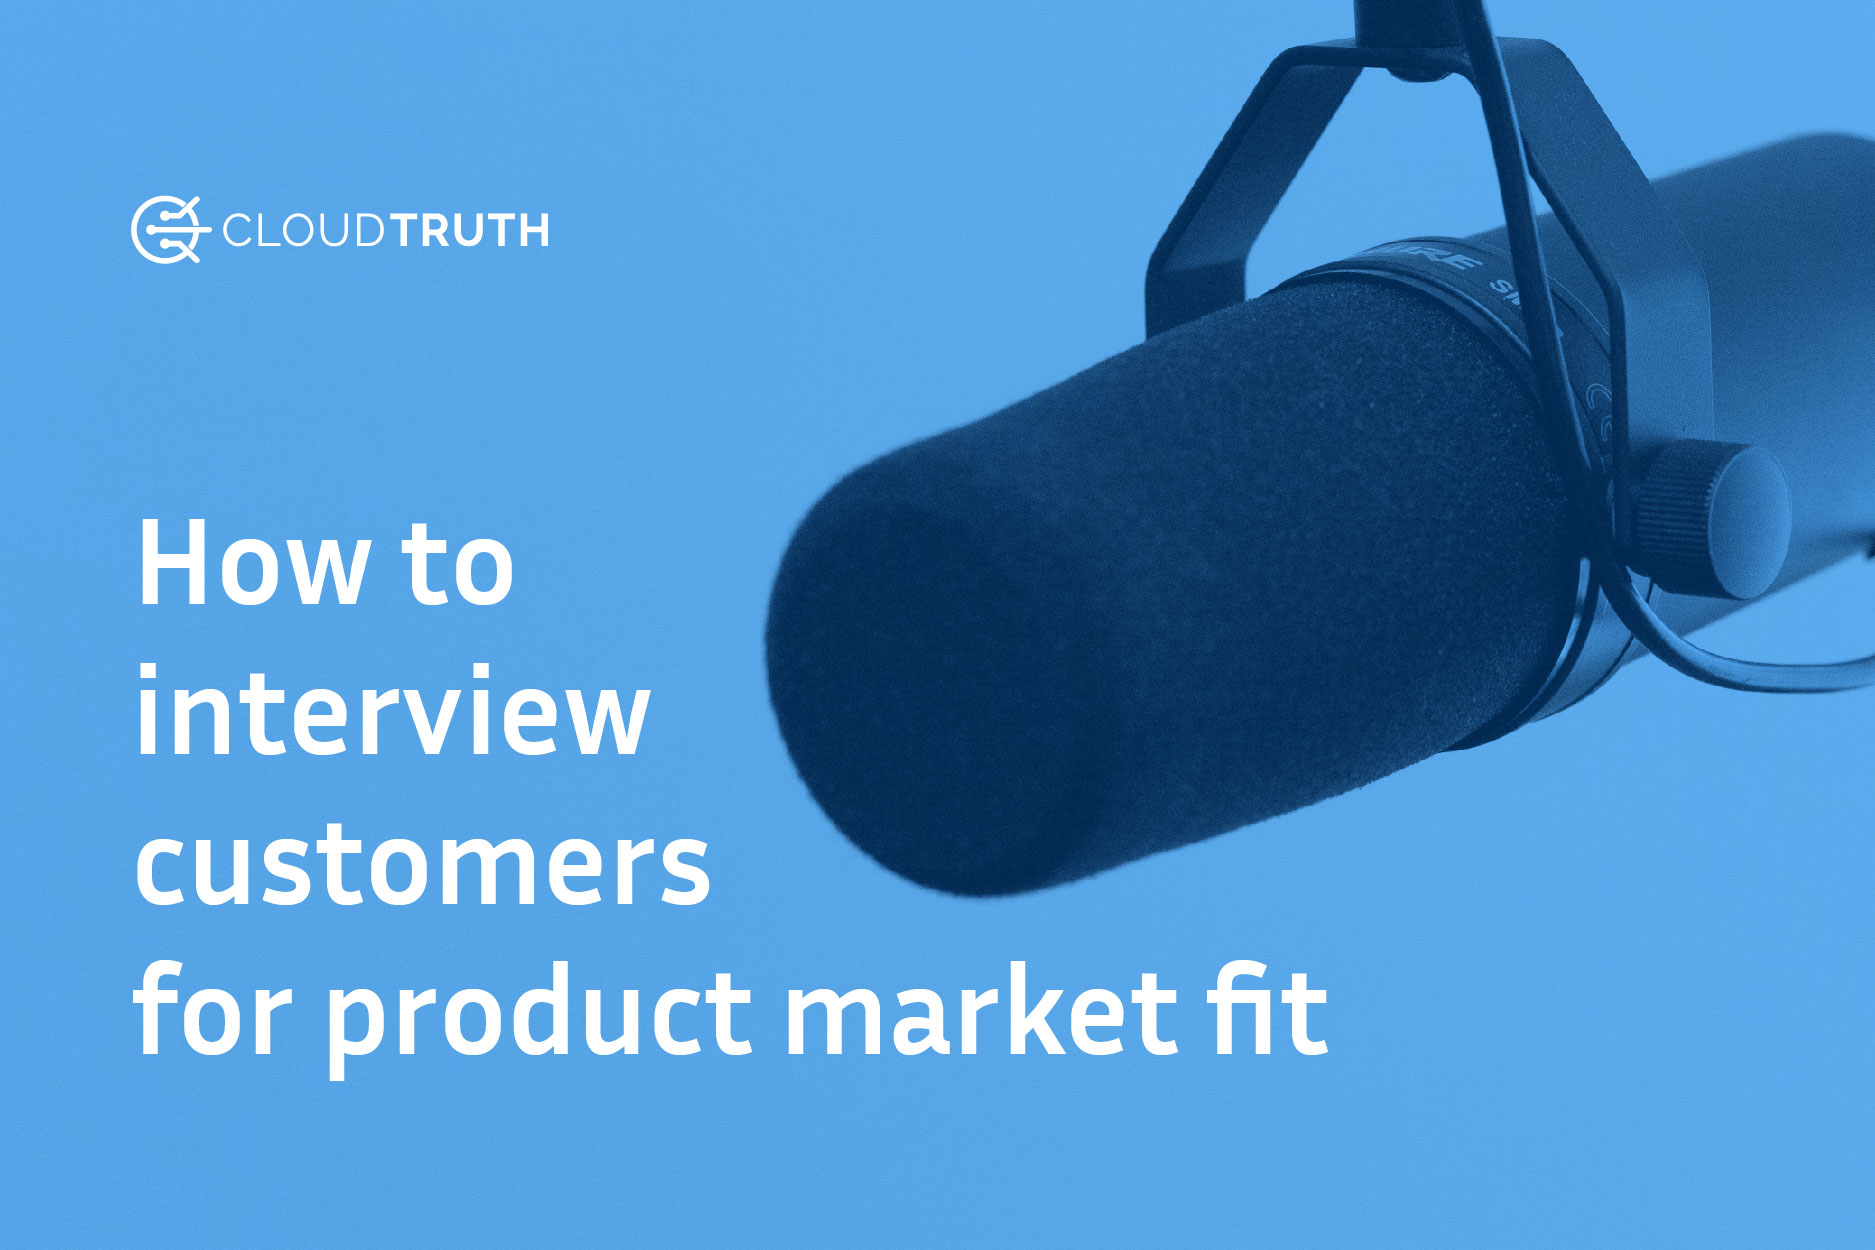 Product-Market Fit Starts with Interviewing (Lots of) Customers. Here’s How We Did It.